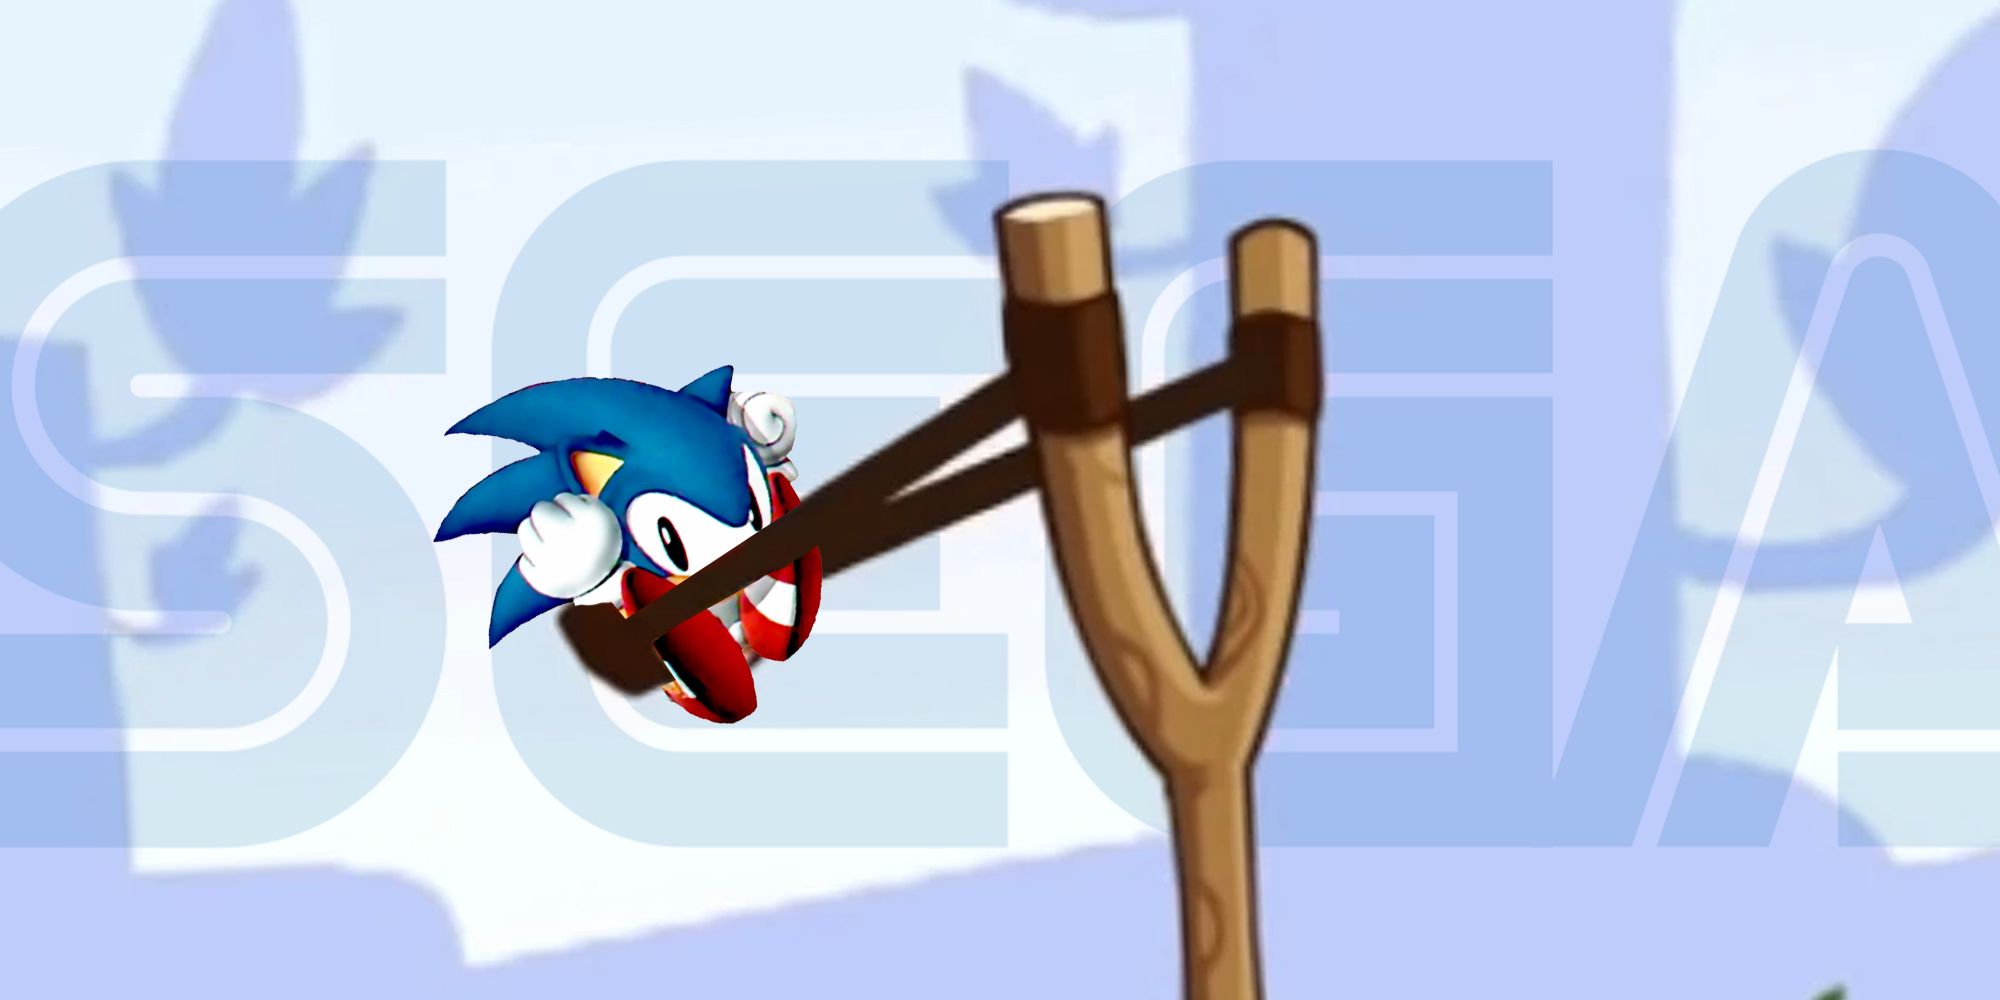 Sonic in a slingshot like the Angry Birds game